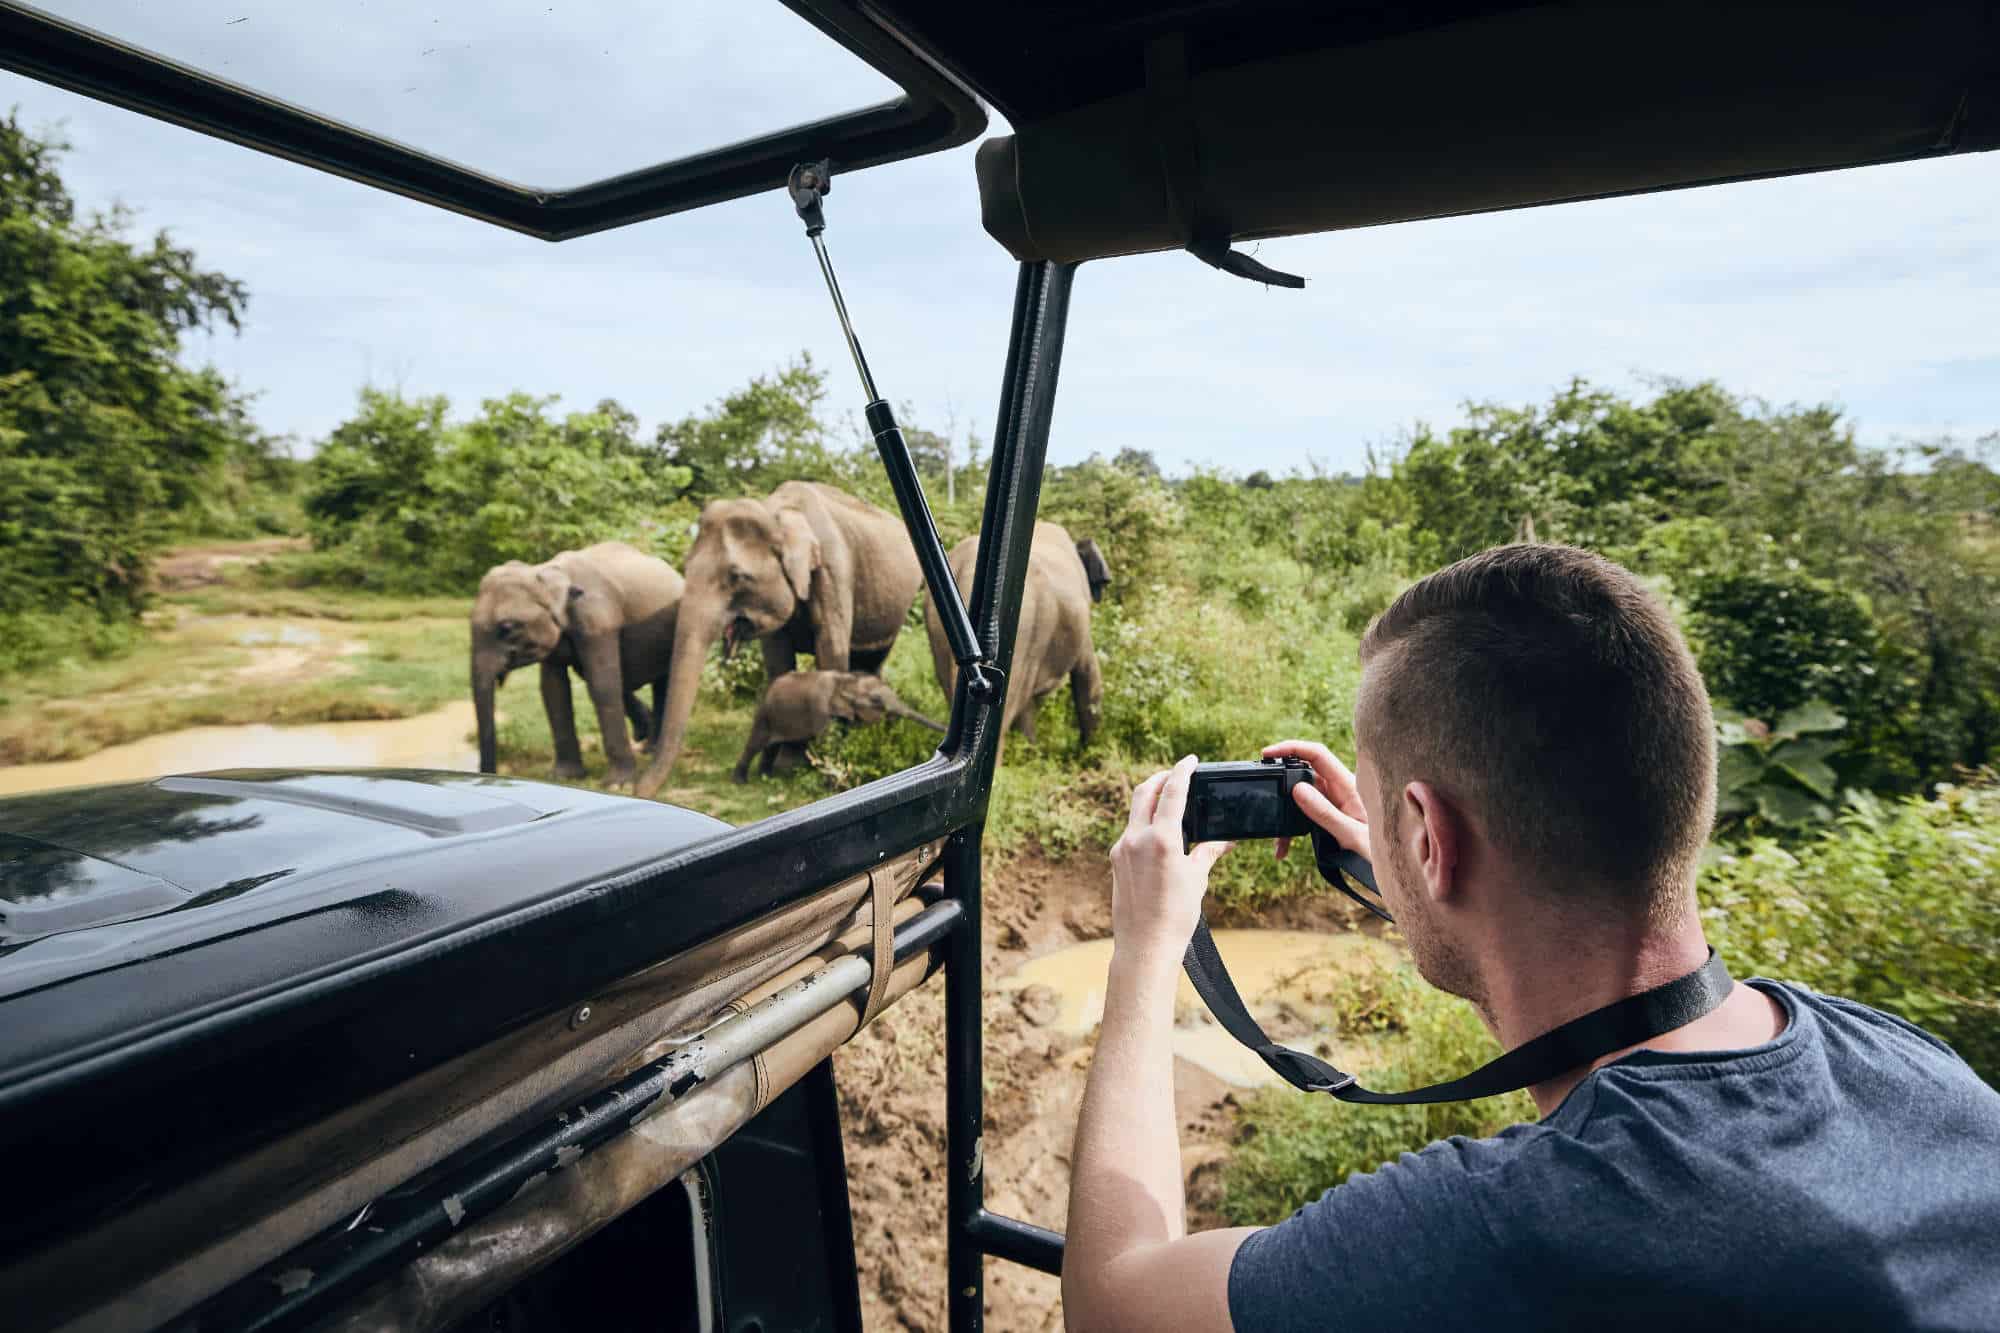 Taking Picture of Elephants